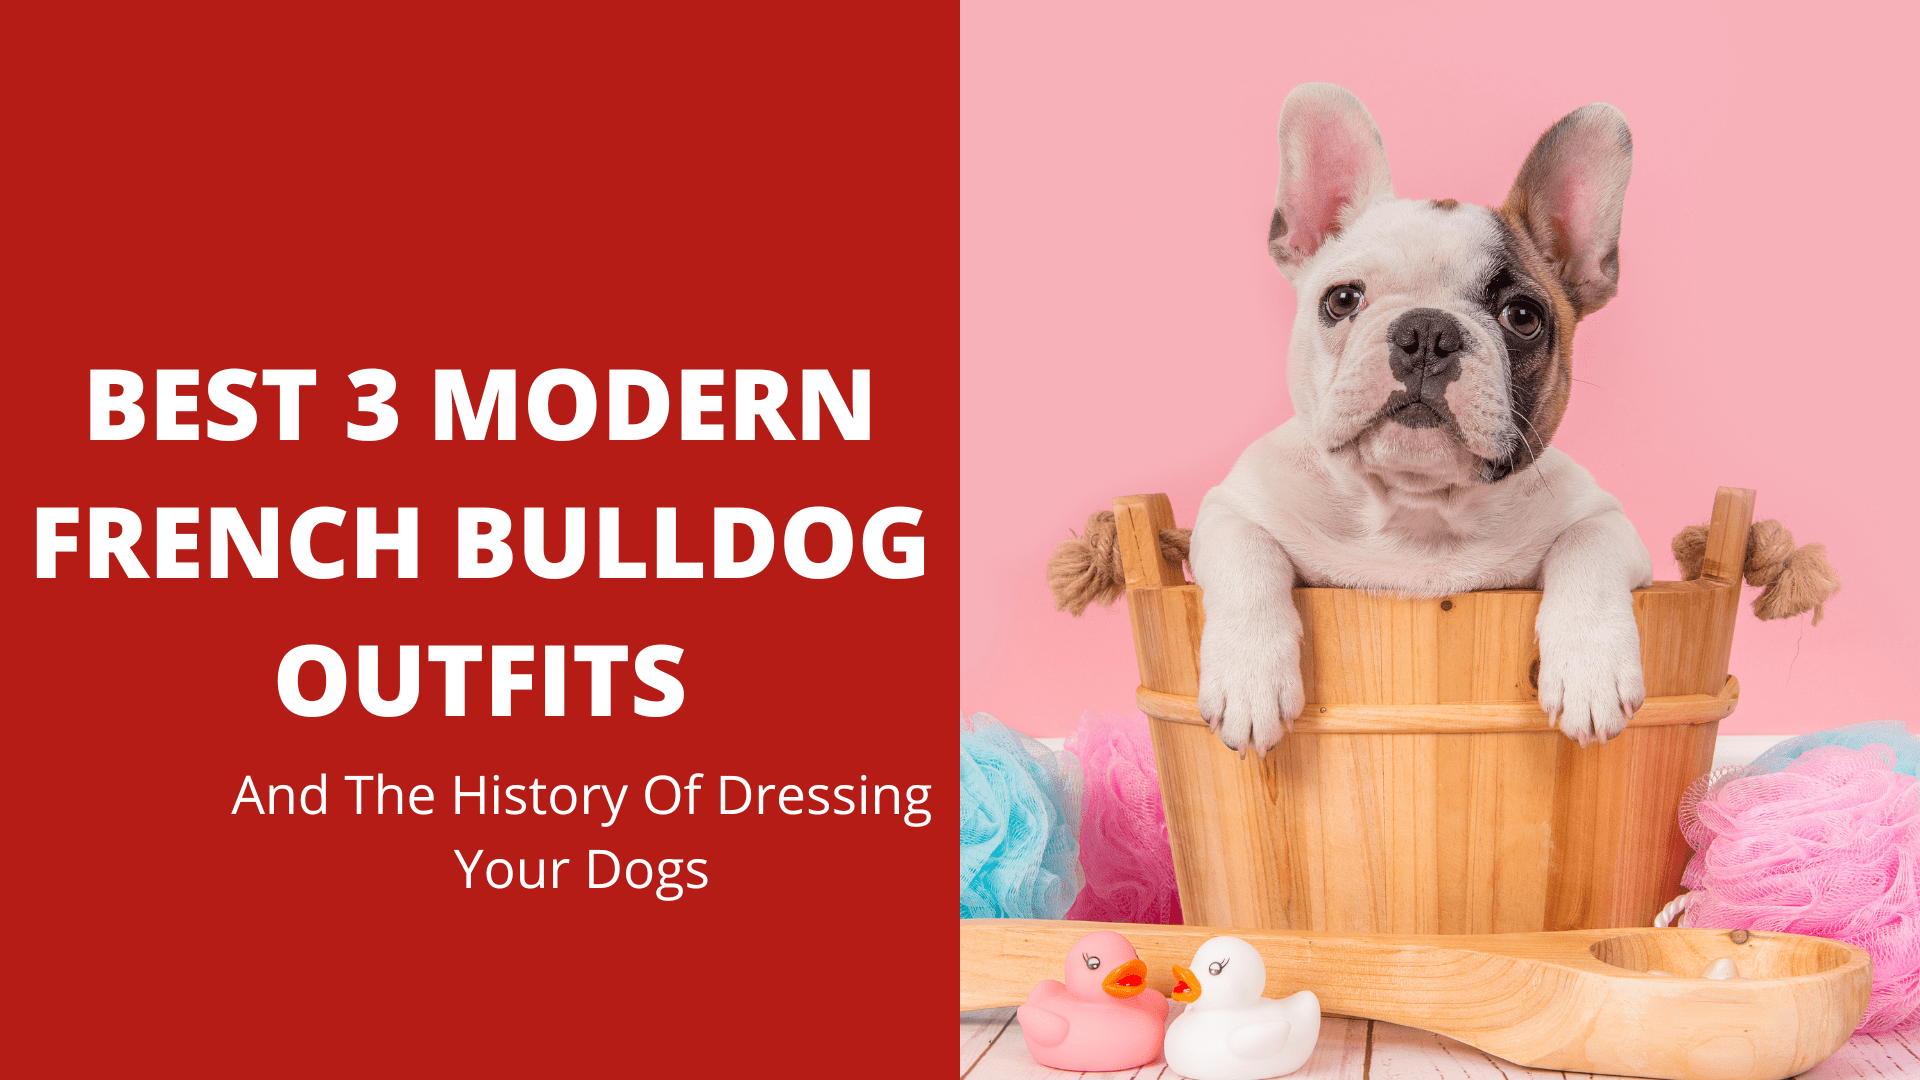 Best 3 Modern French Bulldog Outfits And The History Of Dressing Your Dogs